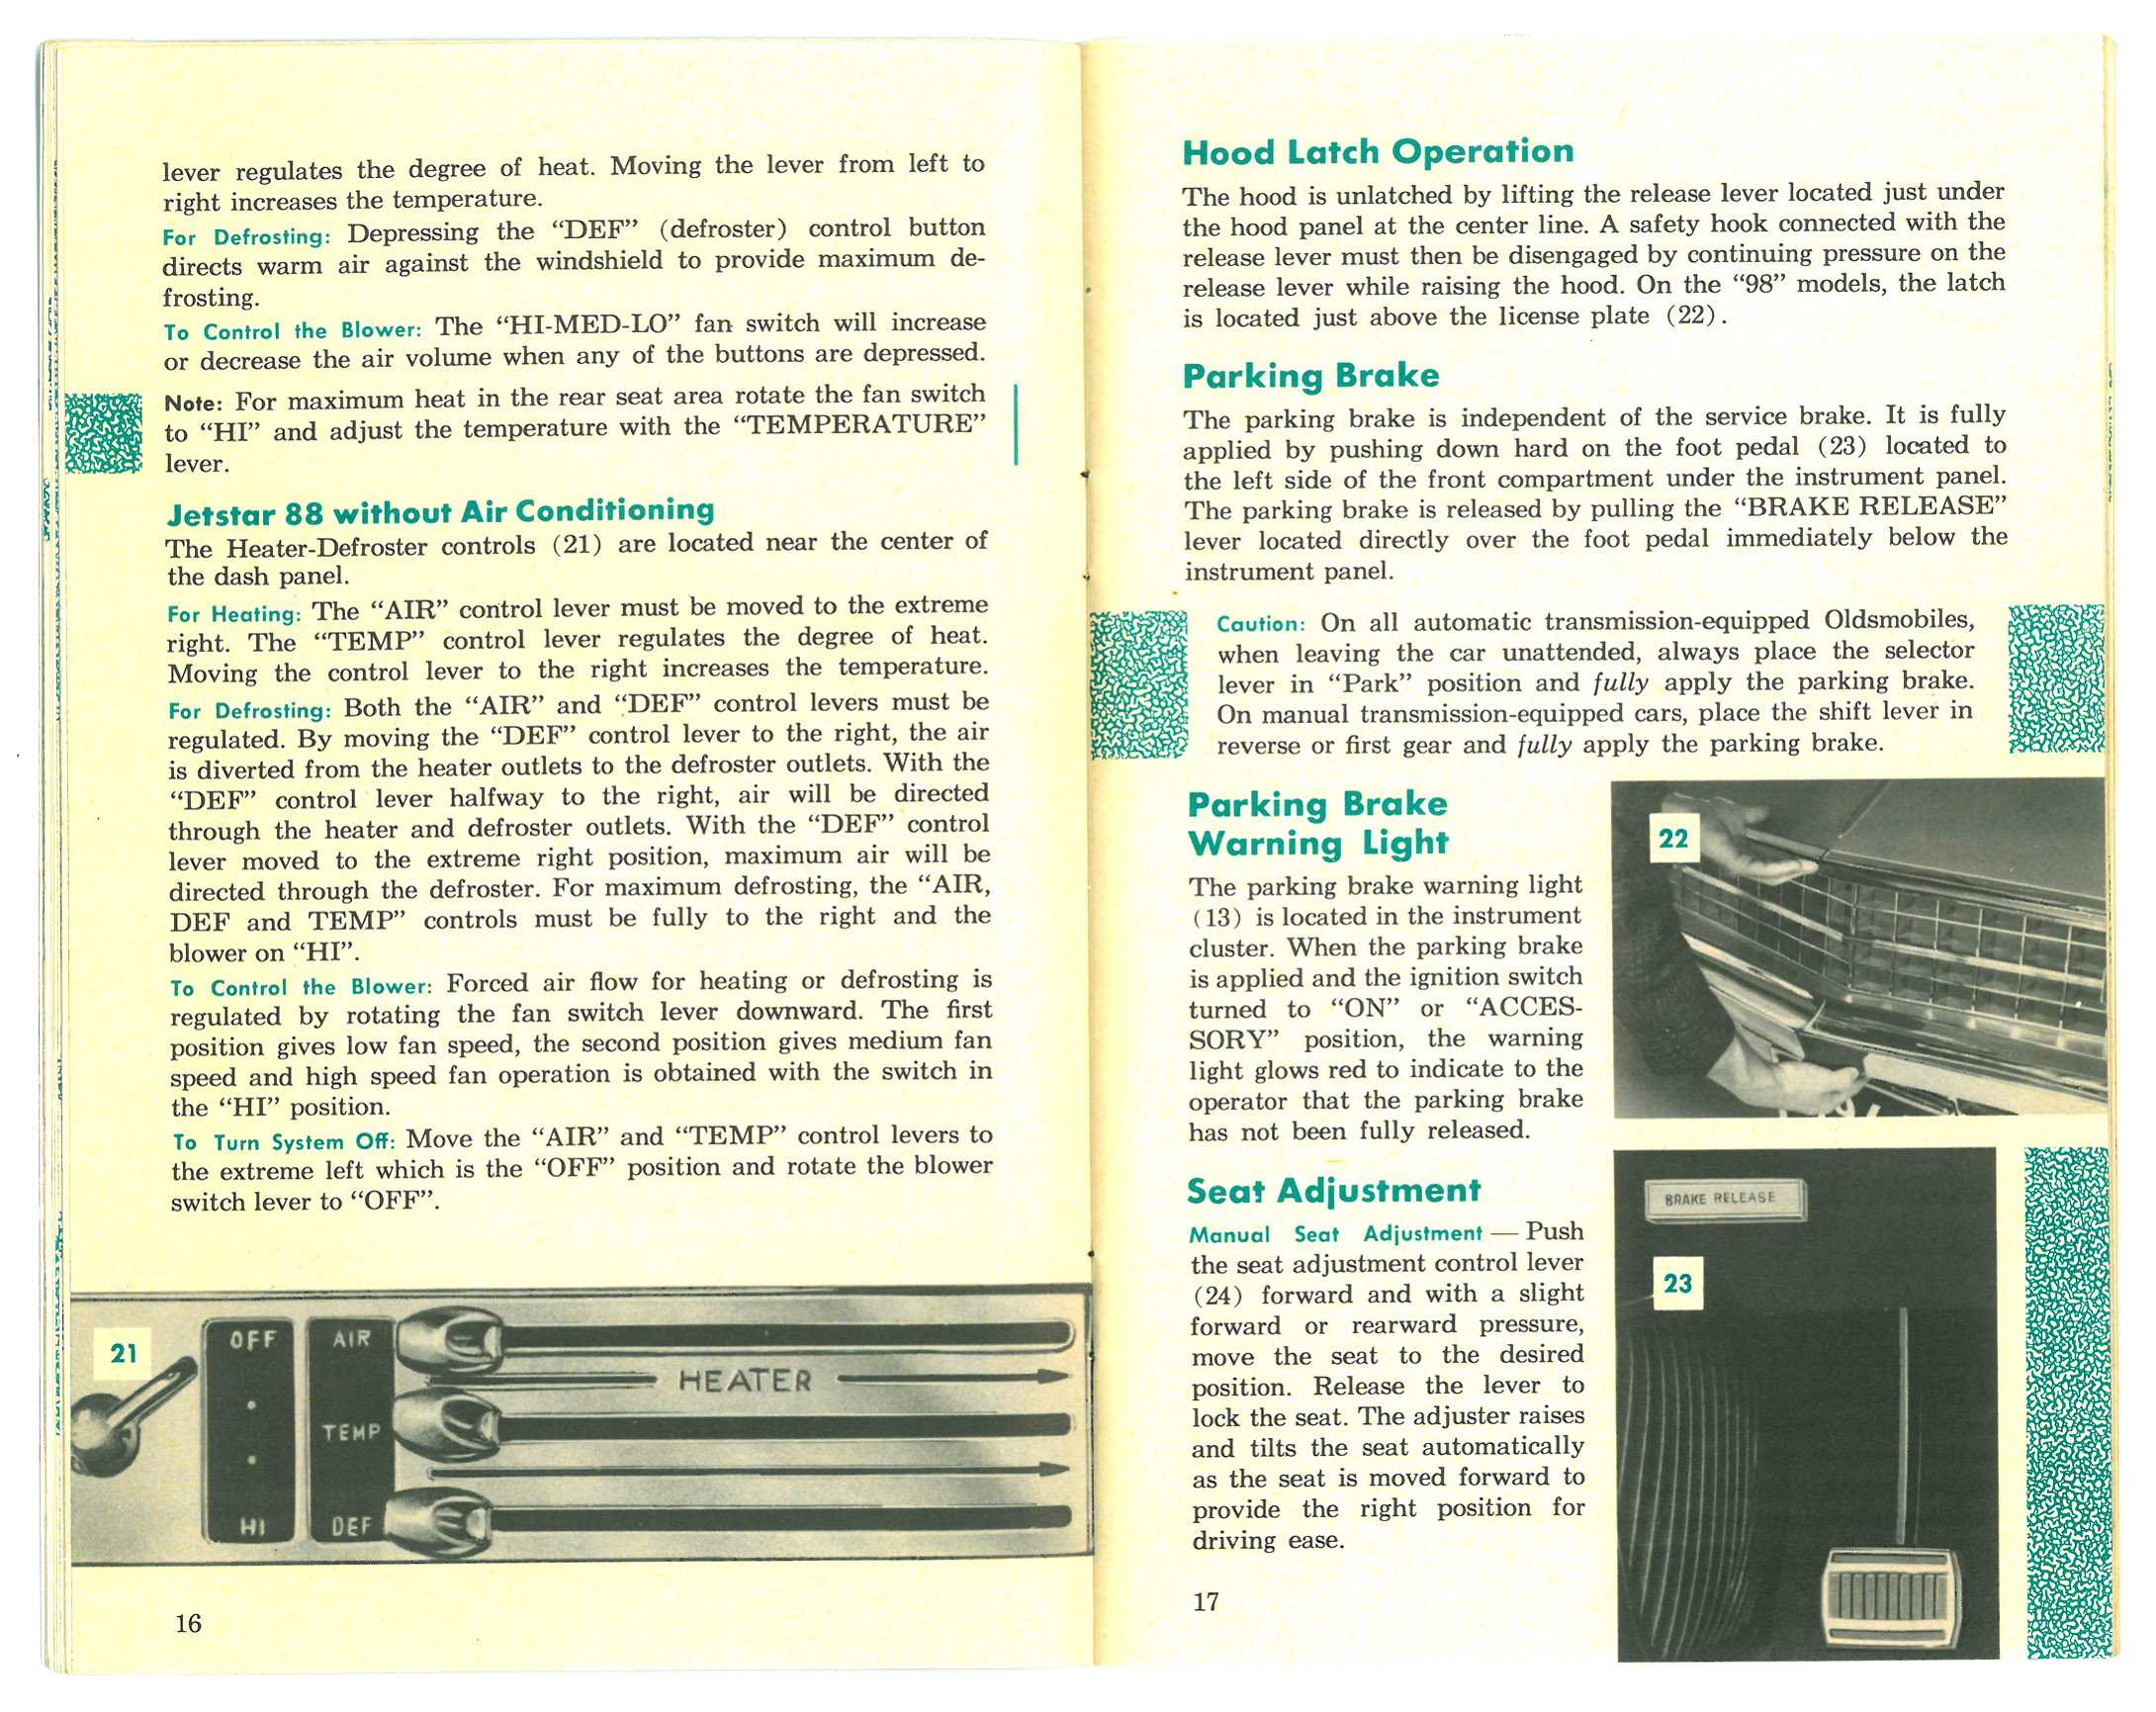 1966_Oldsmobile_owner_operating_manual_Page_10